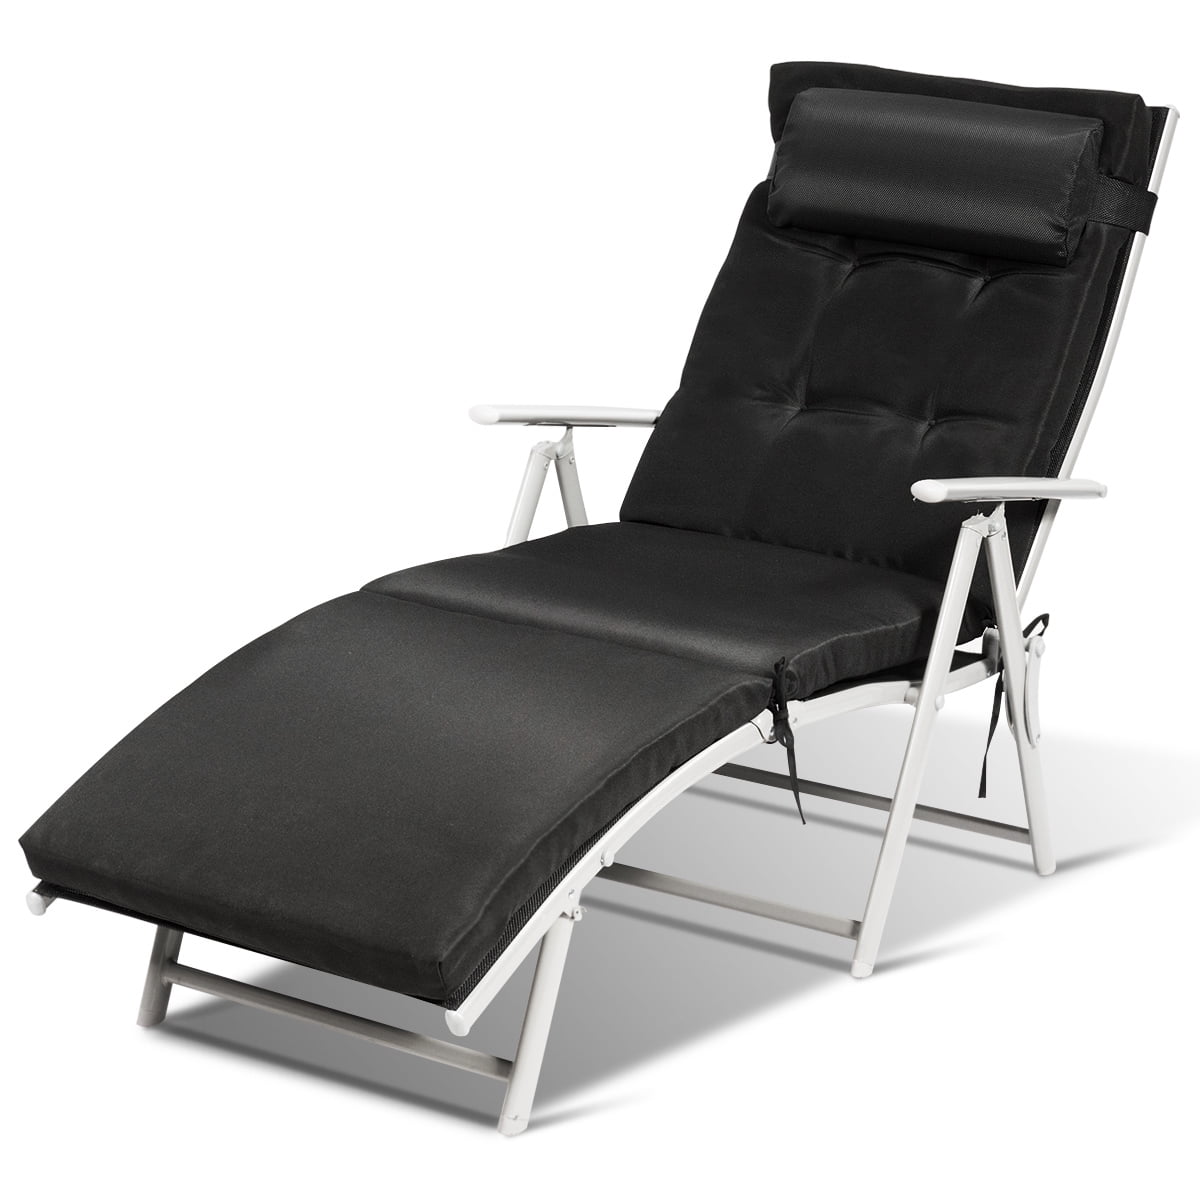 FUFU Patio Lounge Chairs Folding Recliner Color : A Adjustable Beach Reclining Patio Chairs with Cushioned Lumbar Pillow and Integrated Headrest Outdoor Portable Sun Lounger for Patio Balcony